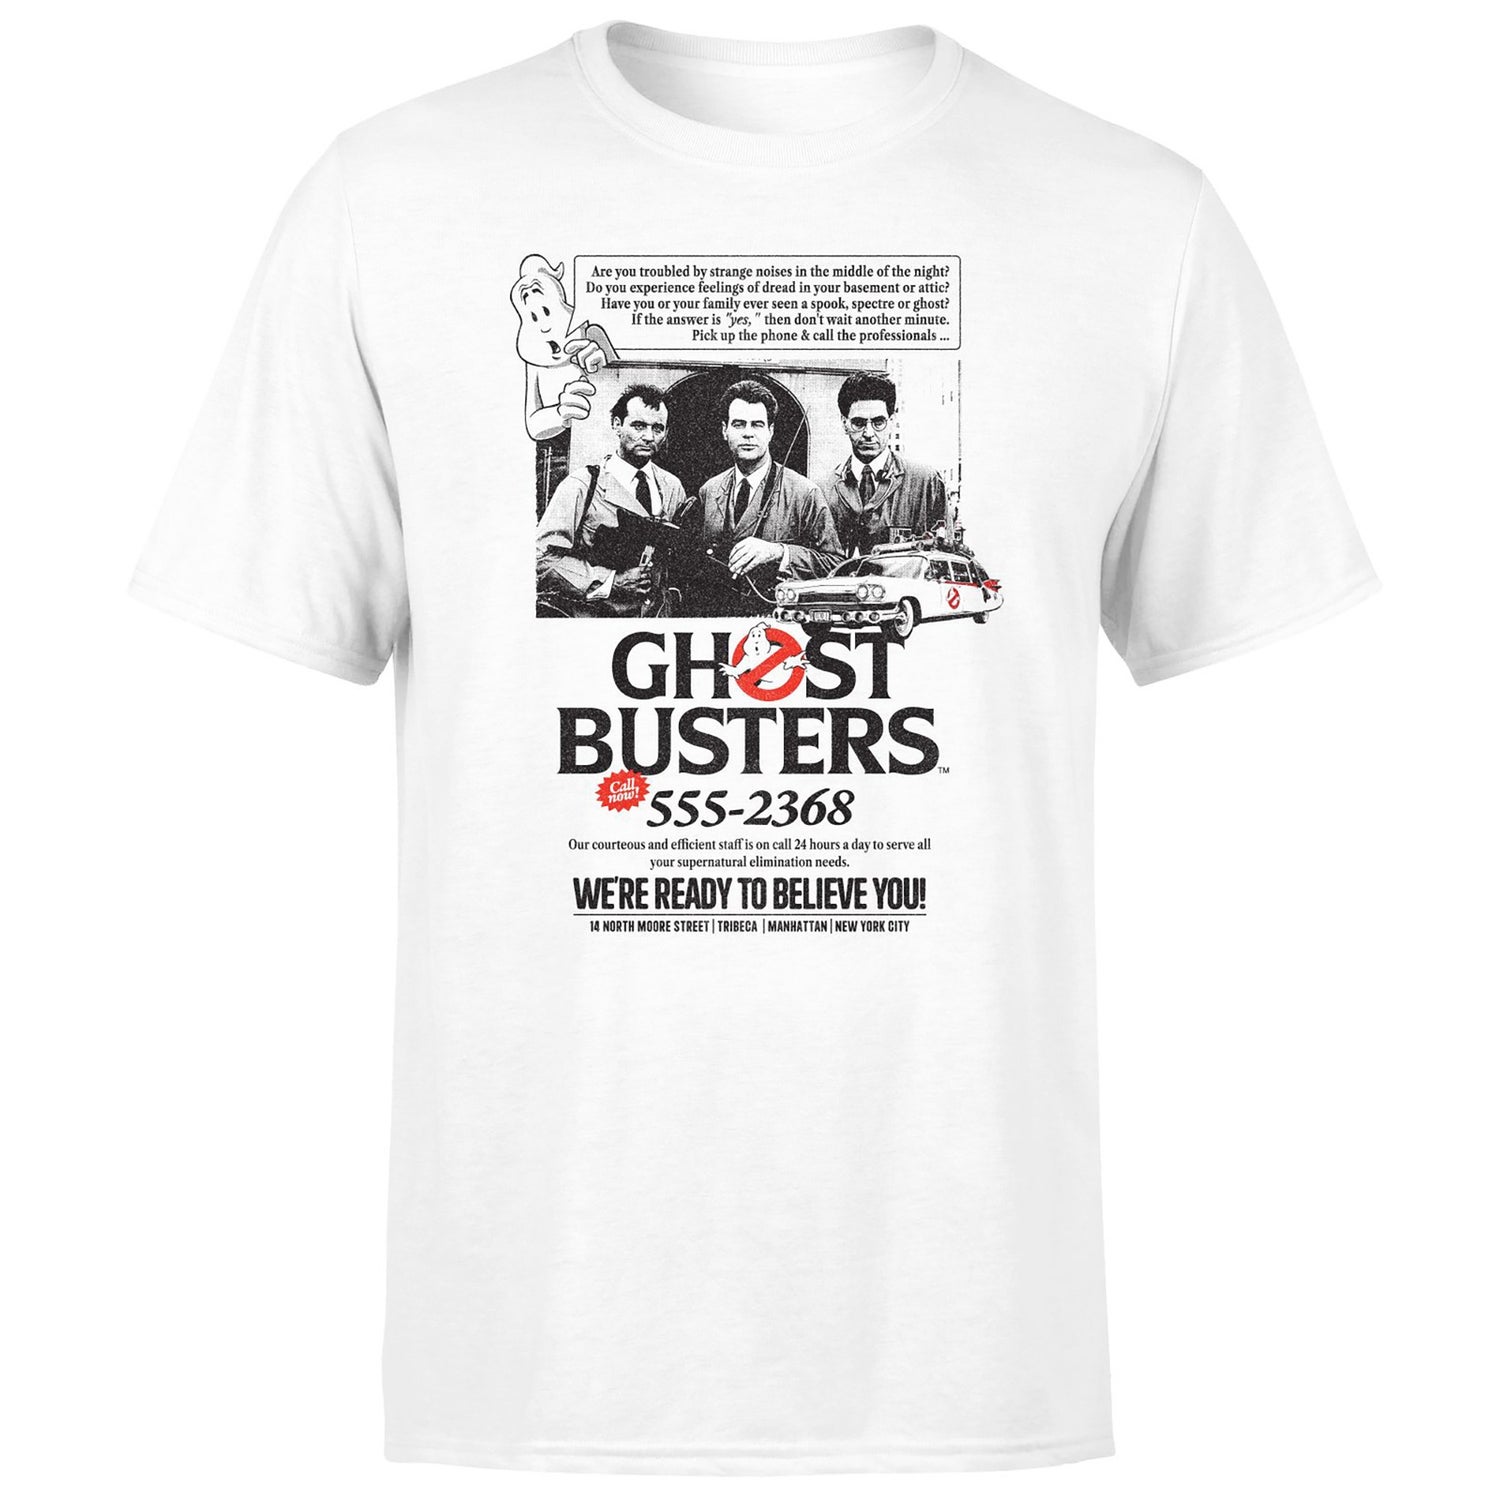 Ghostbusters Vintage Advert Unisex T-Shirt - White